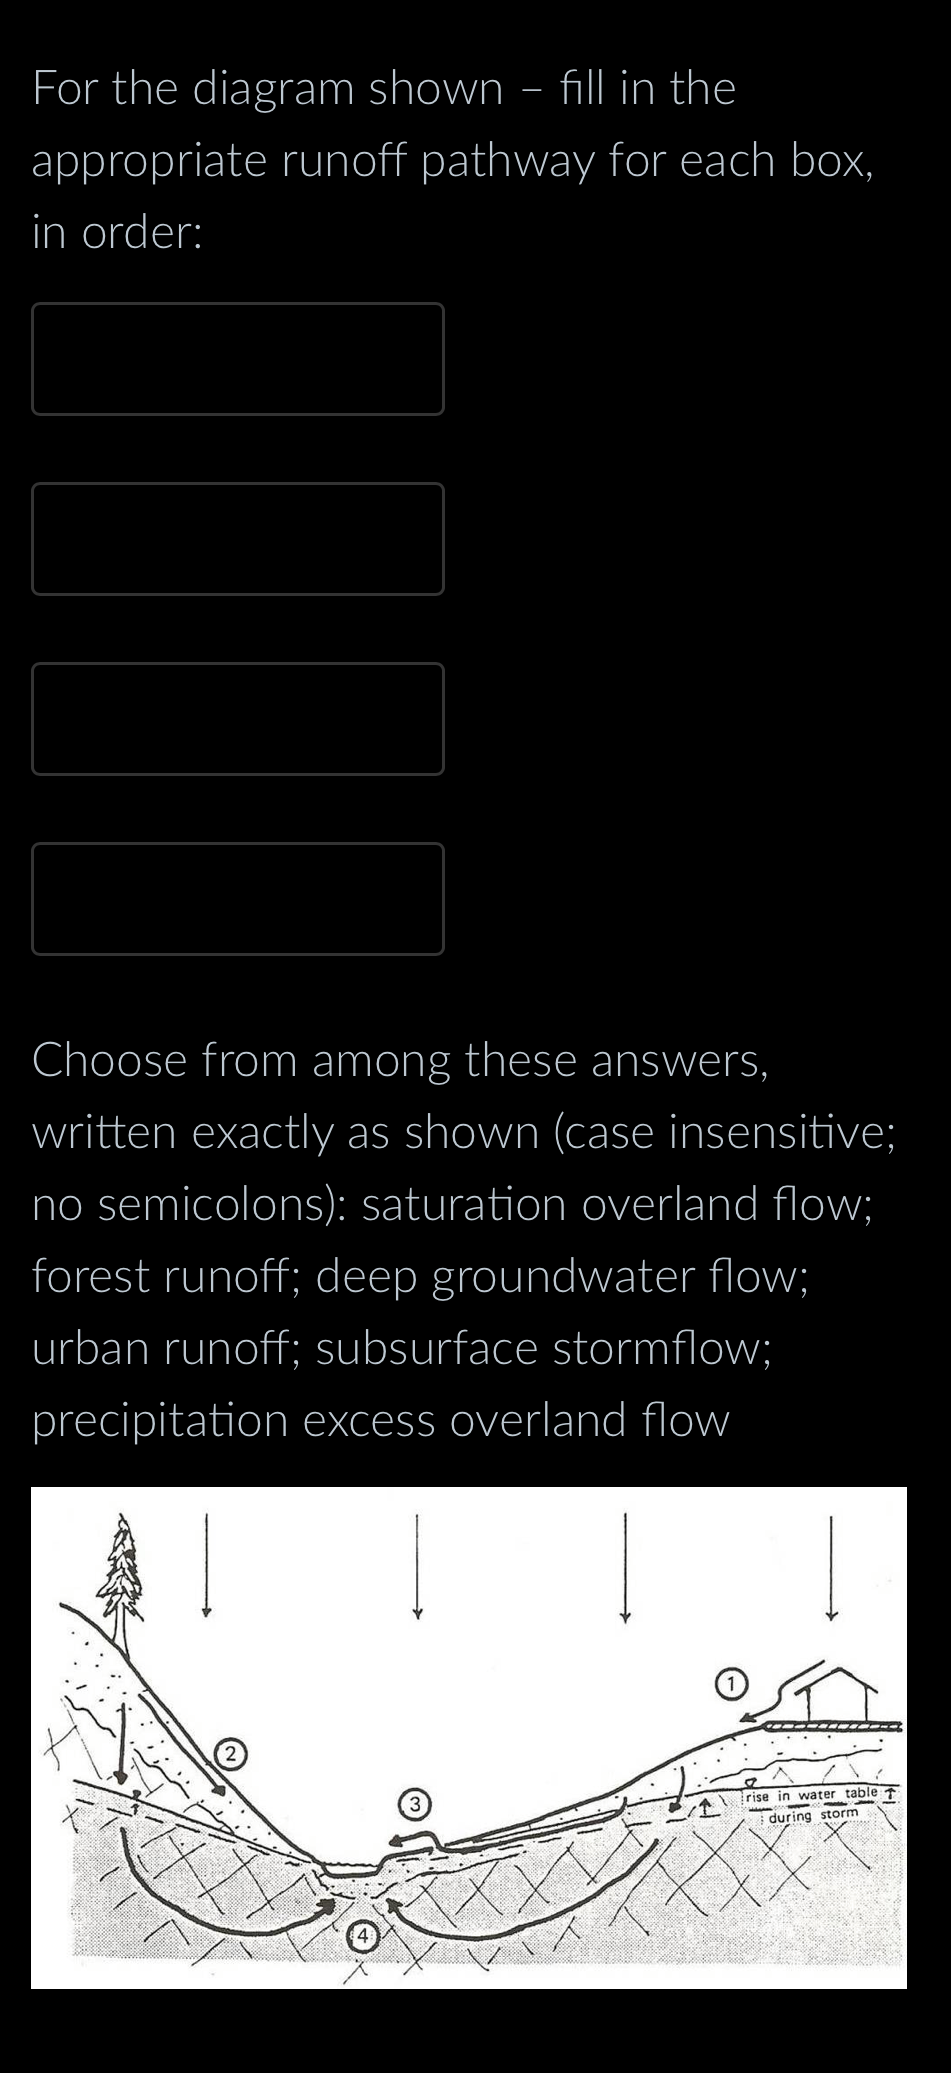 For the diagram shown - fill in the
appropriate runoff pathway for each box,
in order:
Choose from among these answers,
written exactly as shown (case insensitive;
no semicolons): saturation overland flow;
forest runoff; deep groundwater flow;
urban runoff; subsurface stormflow;
precipitation excess overland flow
rise in water tablet
during storm
**